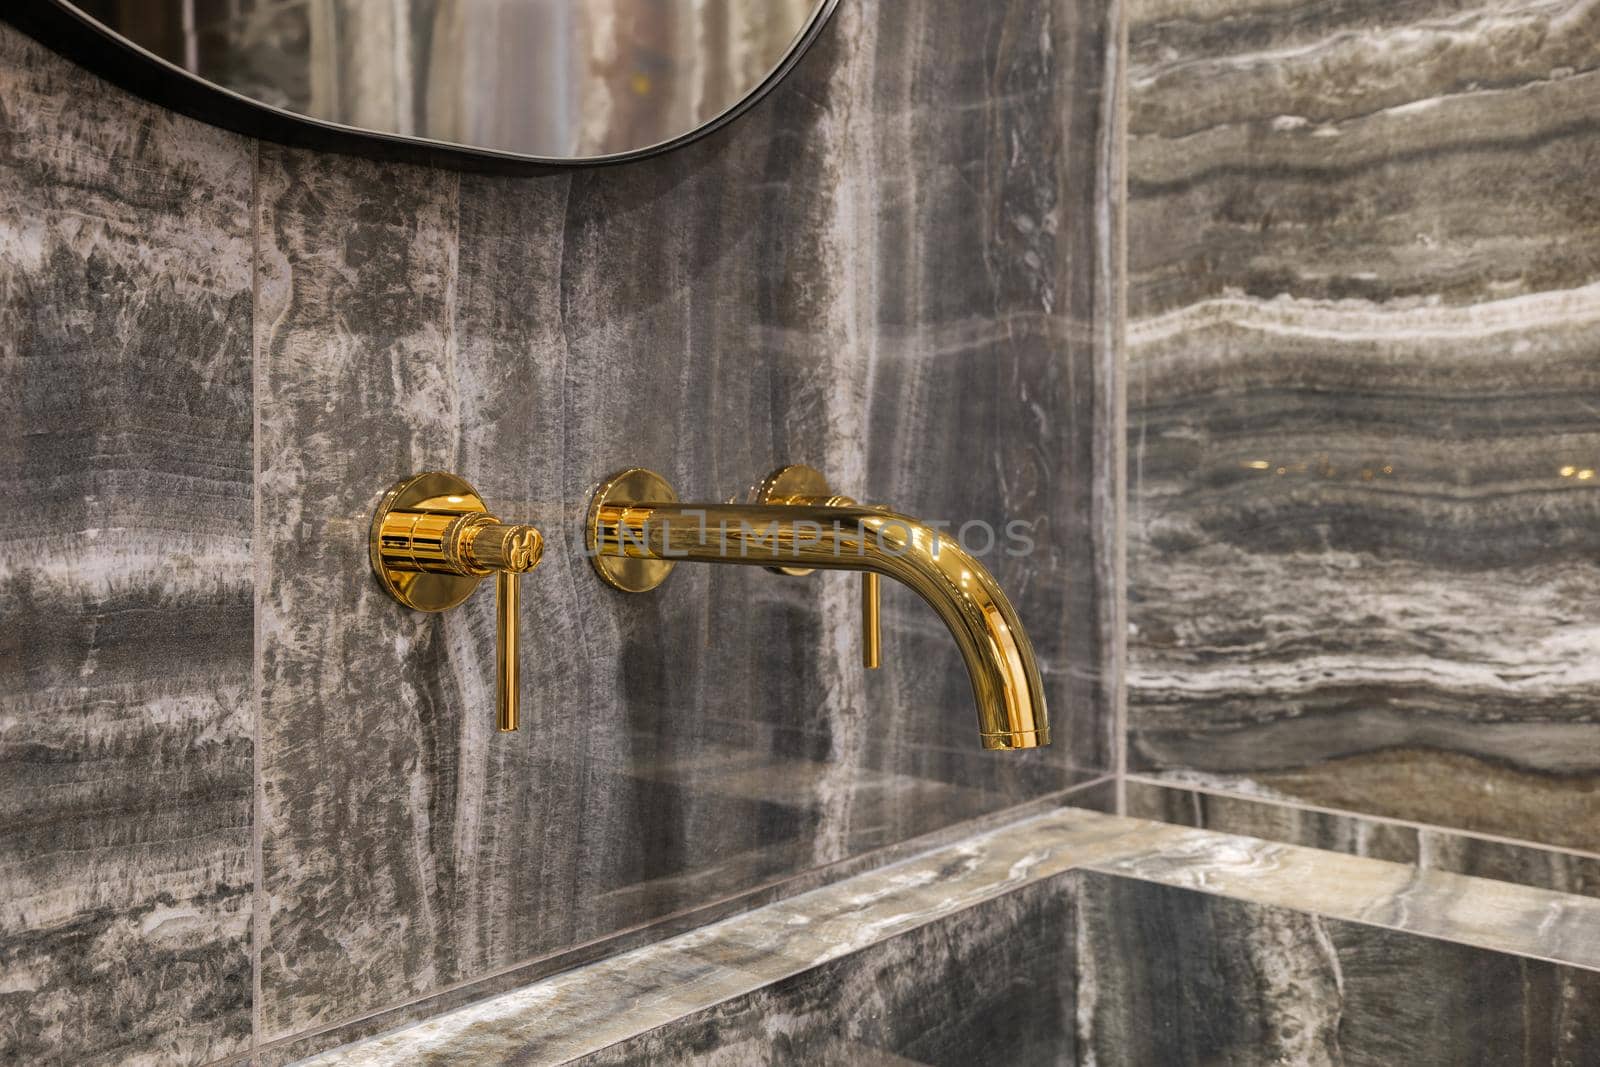 Close-up on modern golden tap in bathroom washbasin with marble wall tiles.